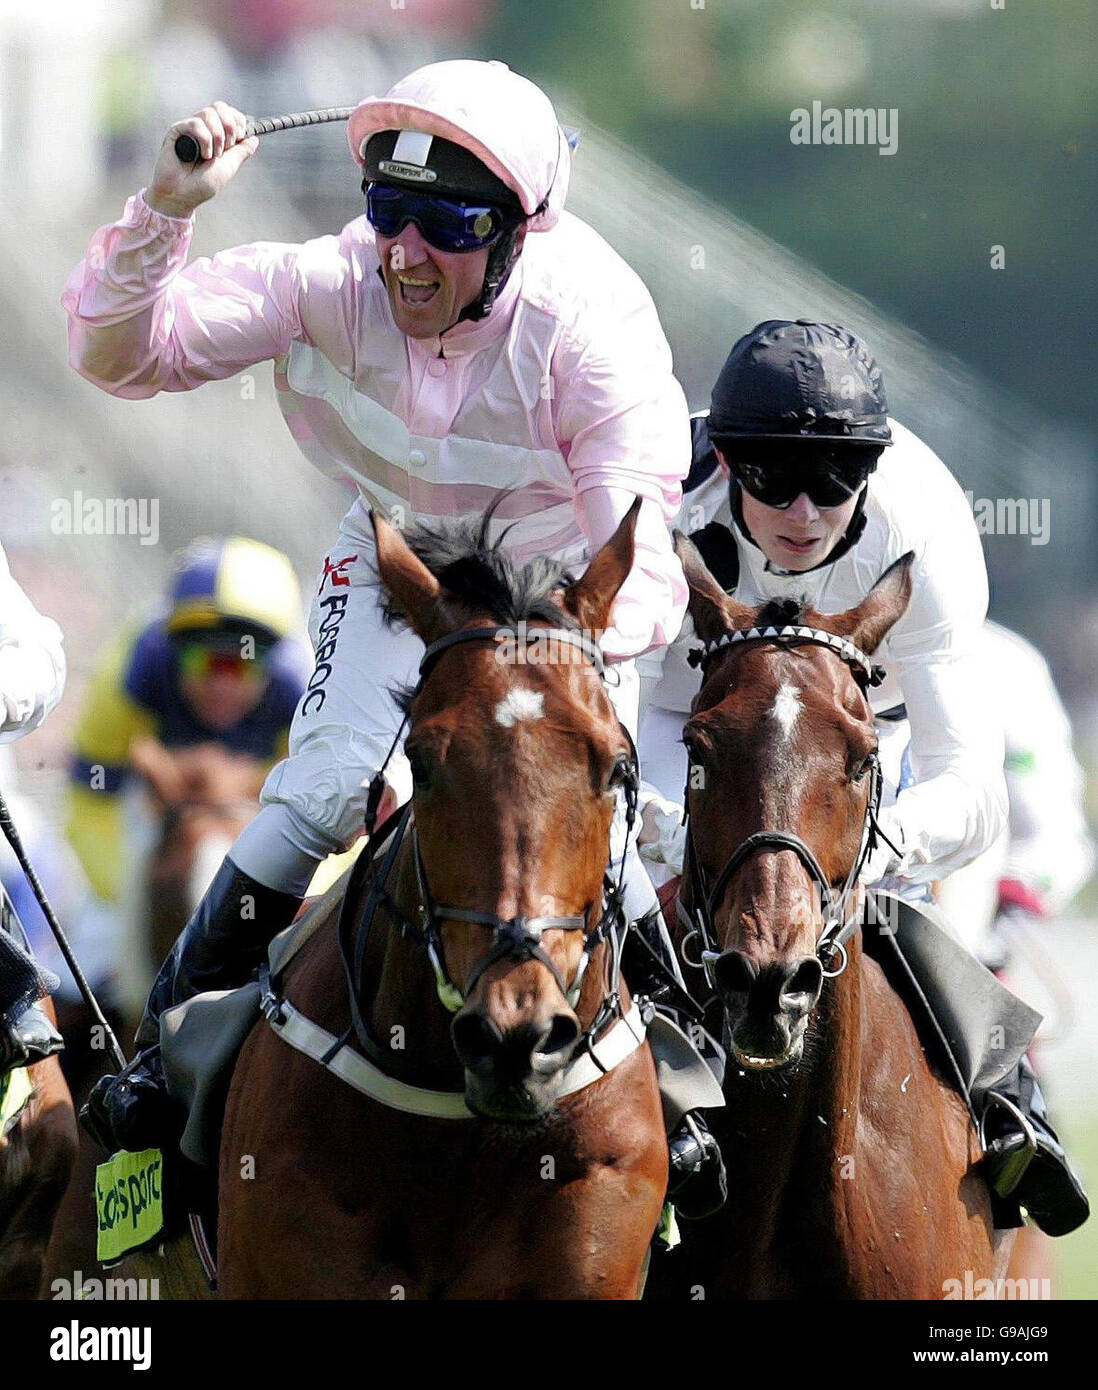 RACING Chester. Admiral ridden by jockey John Egan (wearing pink) wins the Totesport Chester Cup at Chester racecourse, Chester. Stock Photo